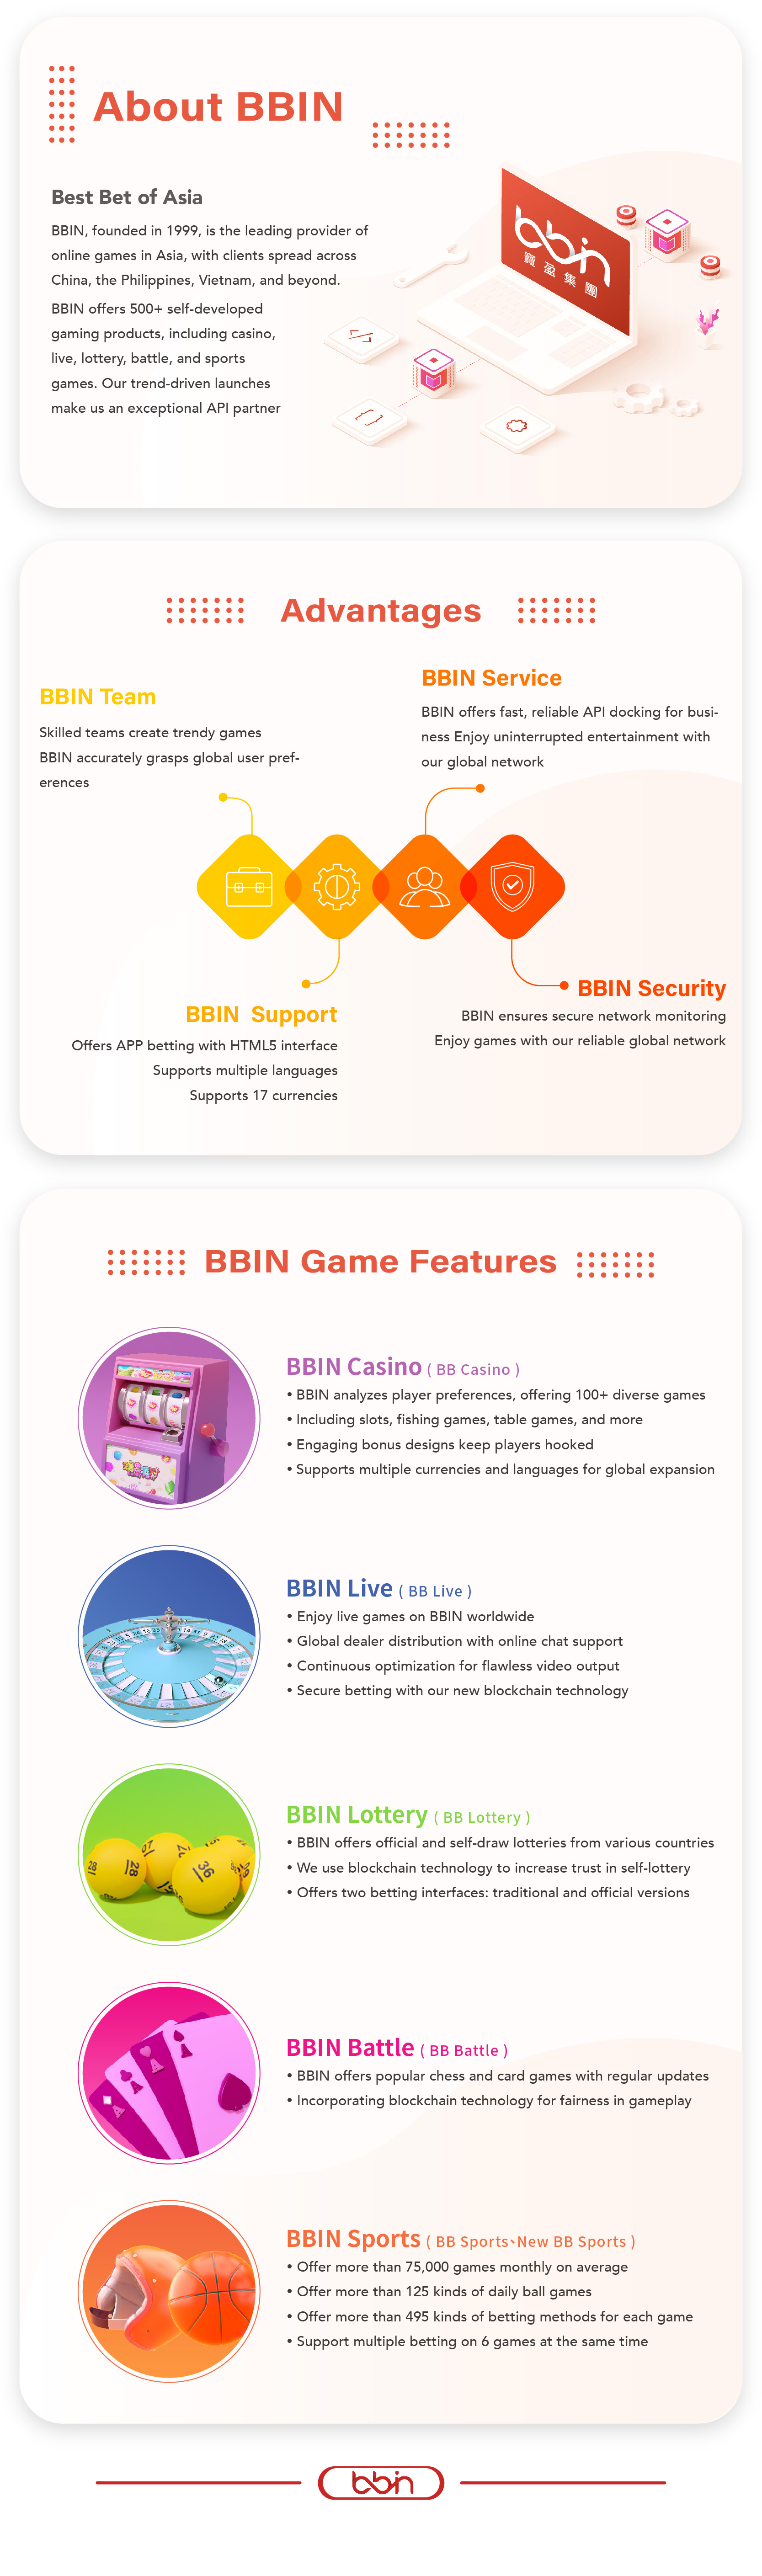 BBIN, founded in 1999, is the top provider of online games in Asia. Since BBIN has been on the market for more than 20 years, it won the industry favors of reputation as a trustworthy and professional platform. More than 500 gaming products, including casino, live games, lottery, battle, and sports games, were self-developed by BBIN. In recent years, it has been committed to expanding the global market and continuously launching products that meet market trends. BBIN is an excellent choice as your API partner